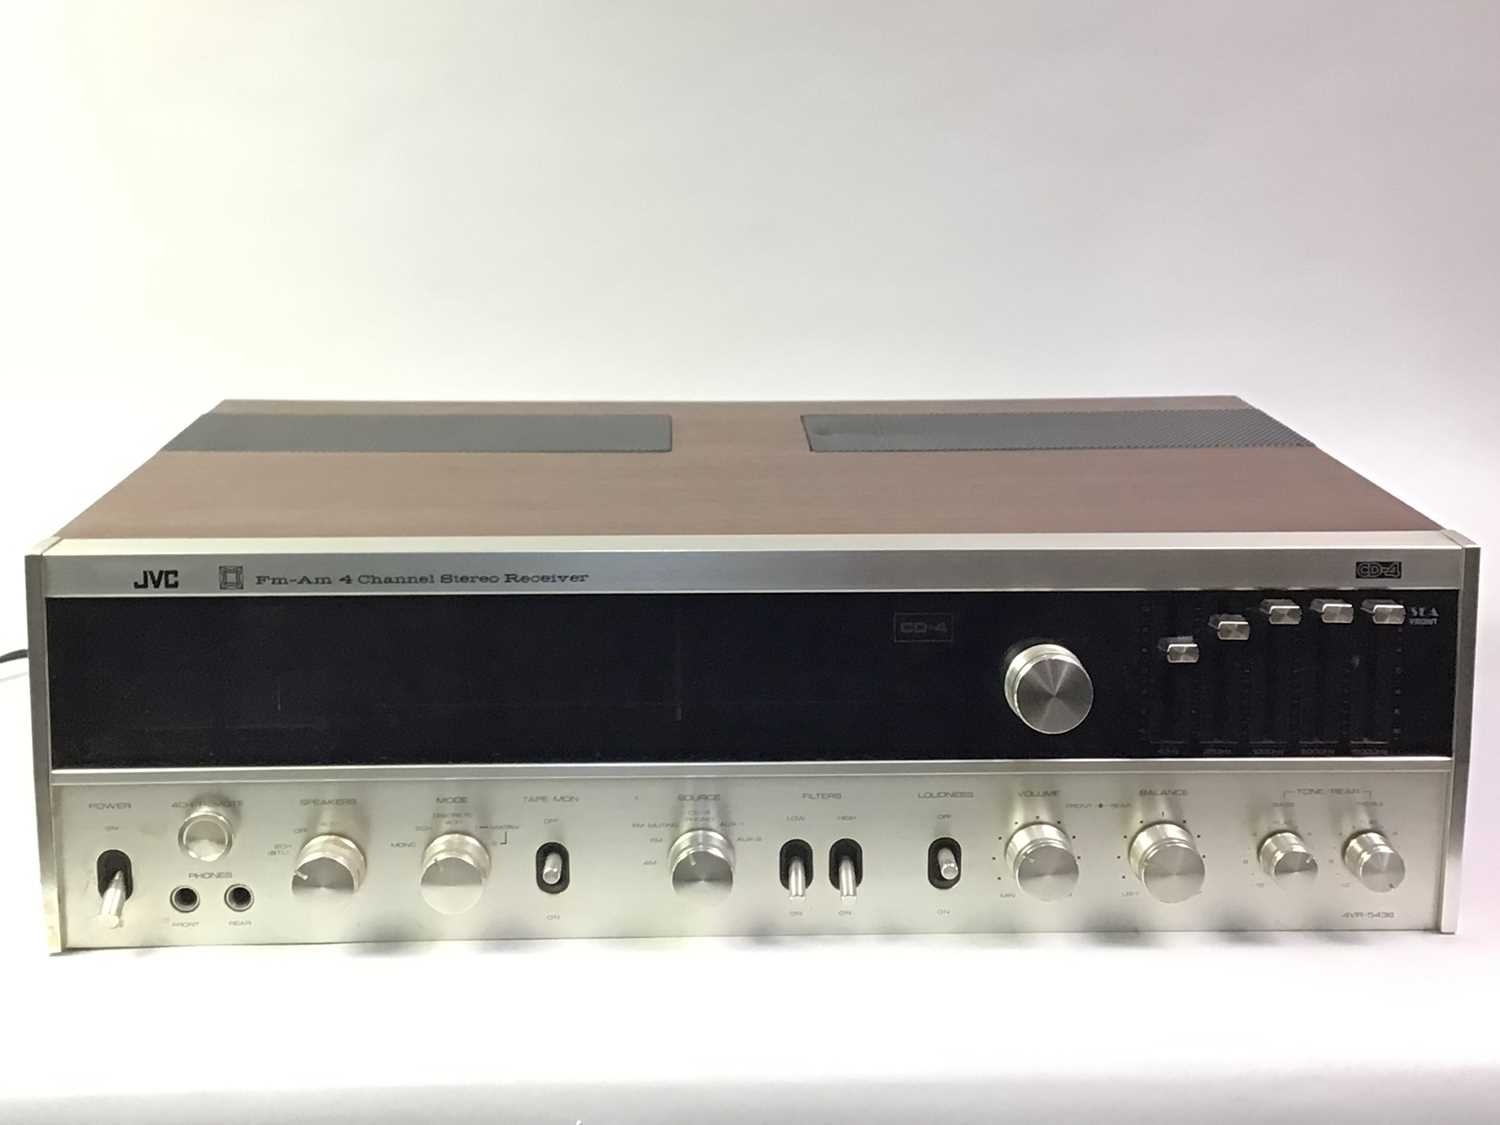 Lot 234 - JVC FM-AM 4 CHANNEL STEREO RECEIVER